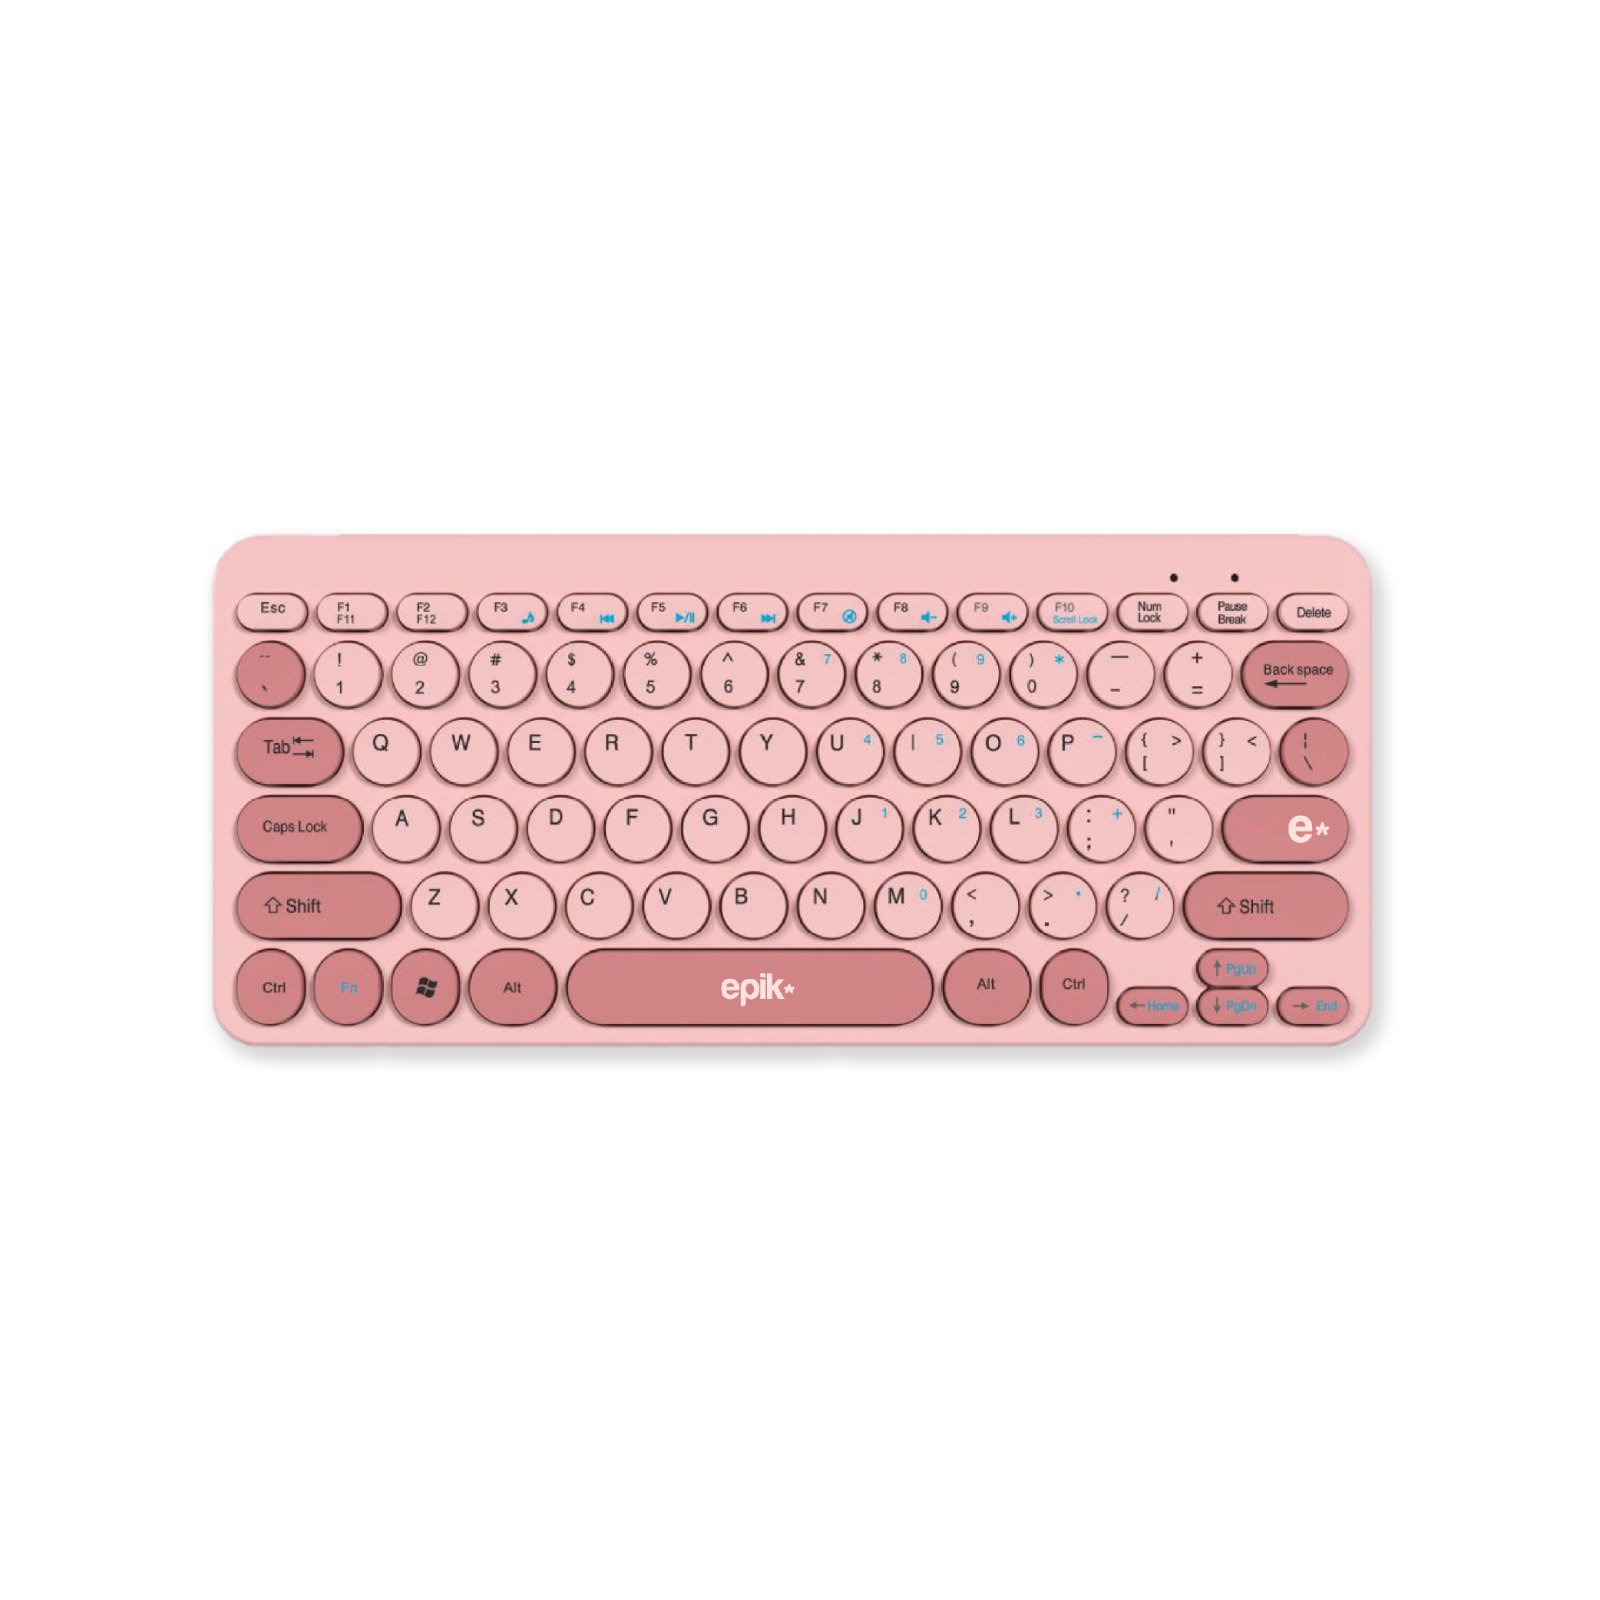 Teclado Rounded Pink Wireless 3022